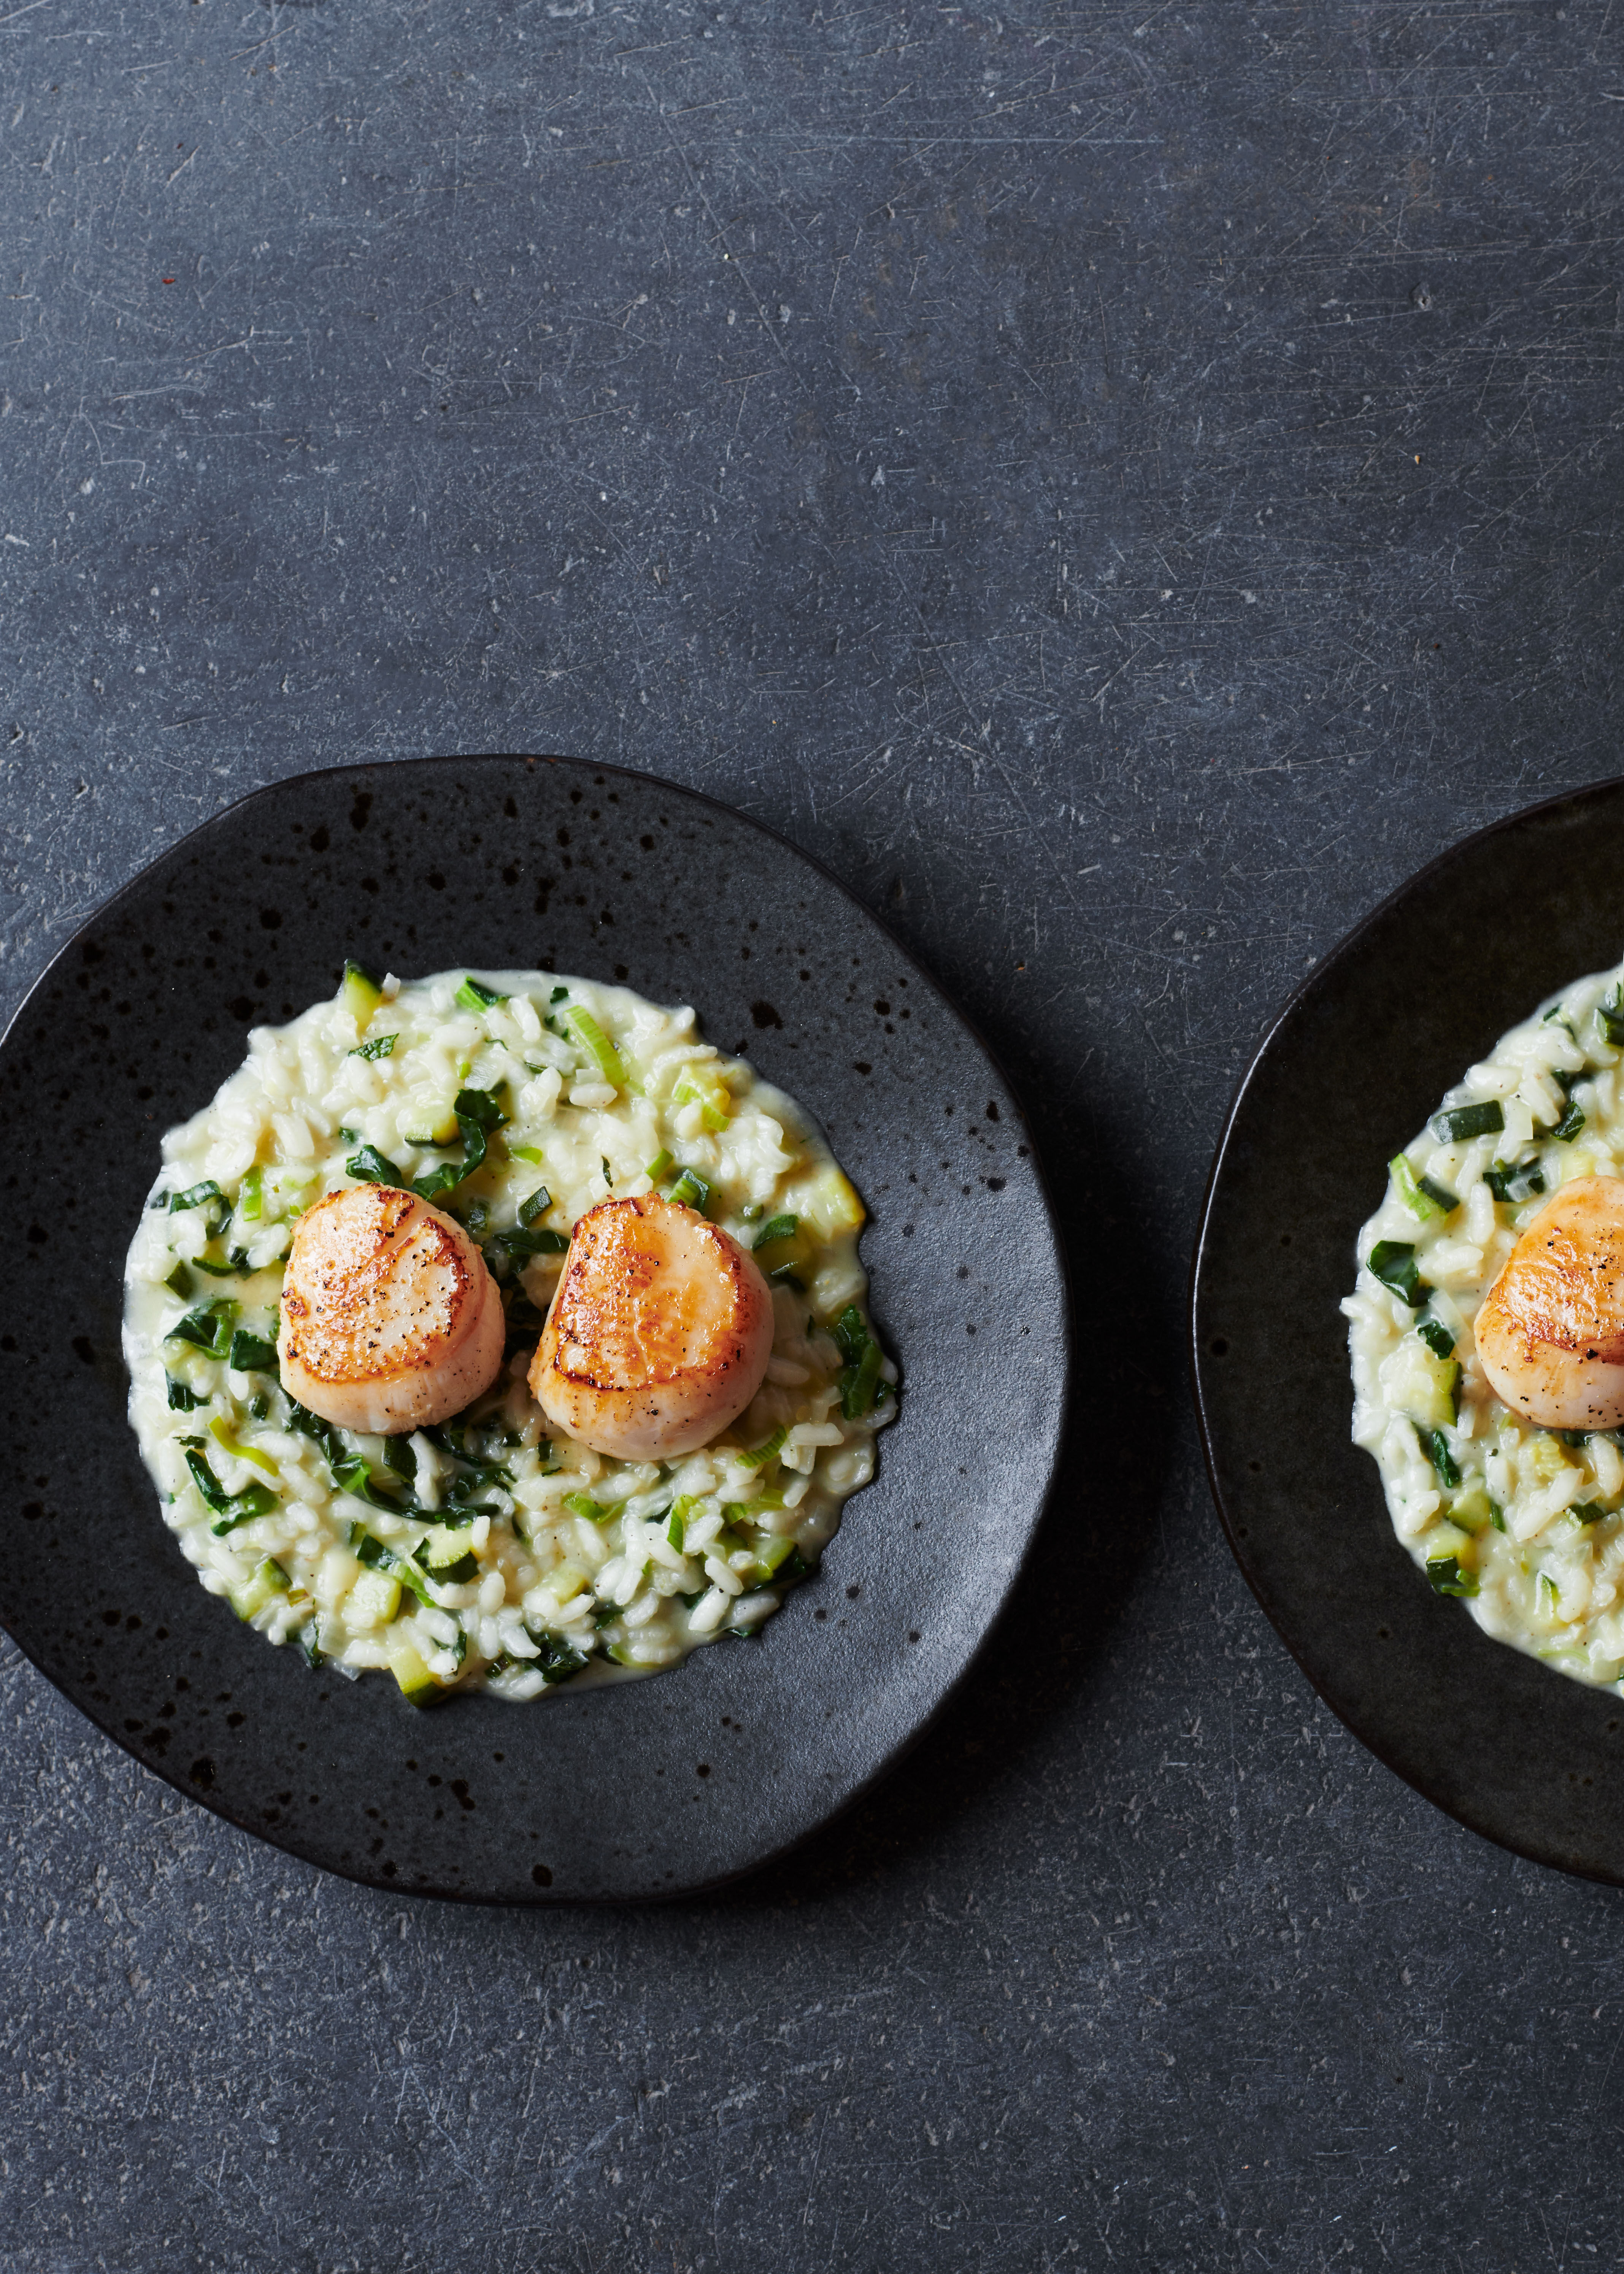 Panfried scallops with risotto